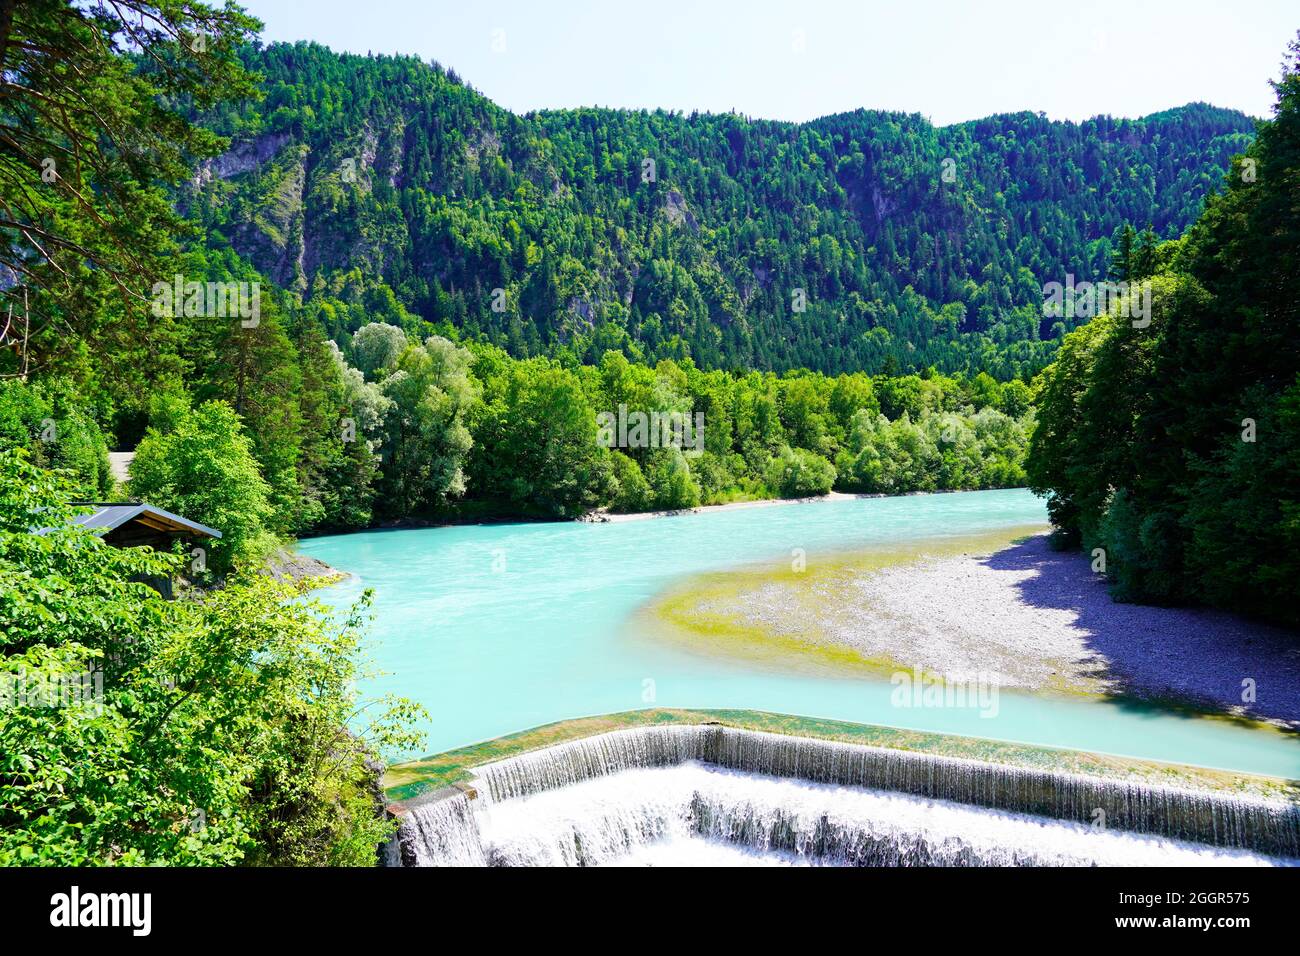 Lechfall near Füssen. Waterfall in Bavaria, Allgäu. River with turquoise blue water and surrounding landscape. Stock Photo